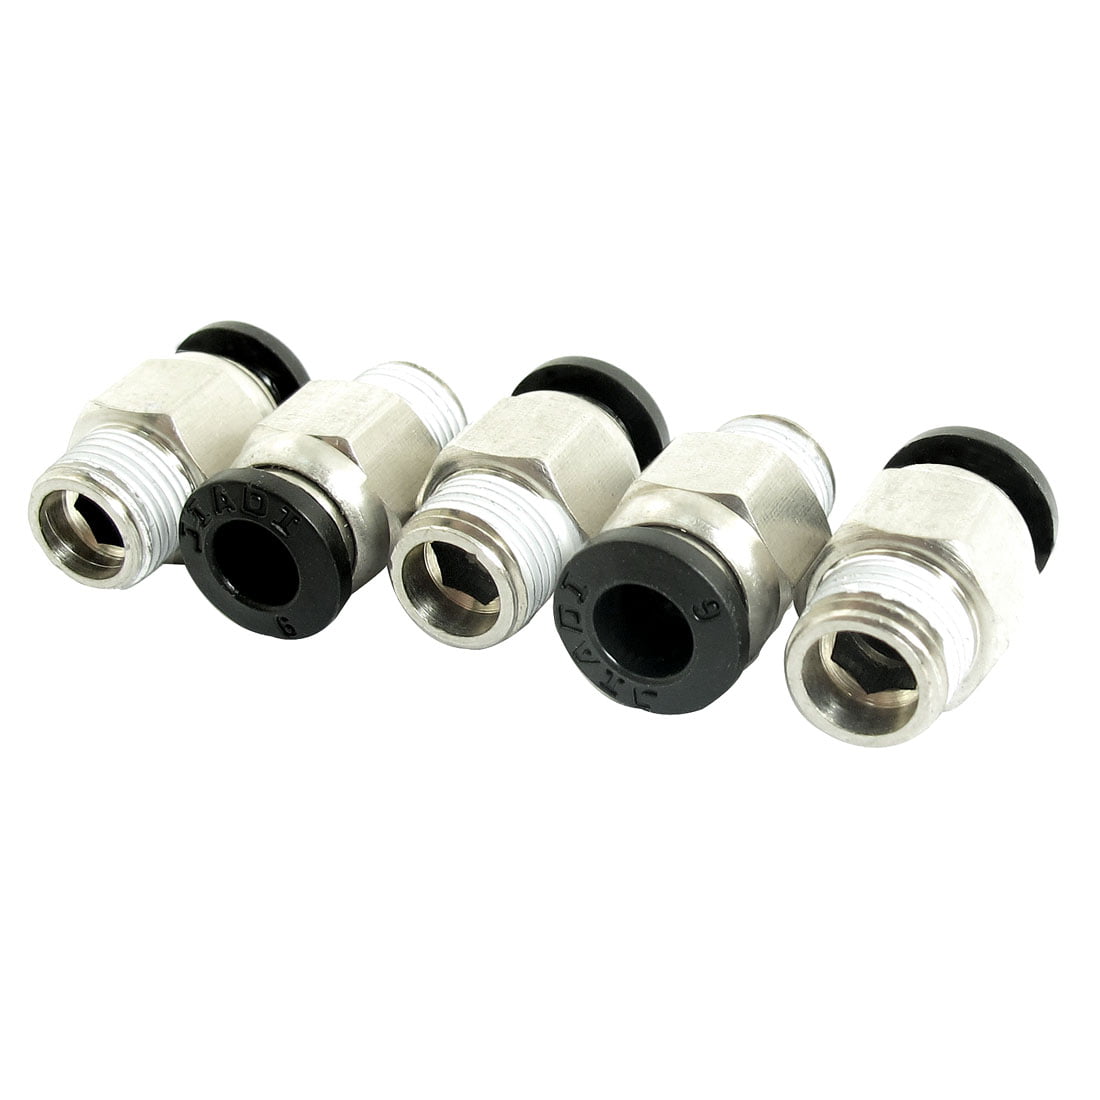 6mm Straight Push in Fitting Pneumatic Push to Connect Air B PM 5PCS Male 1/4" 